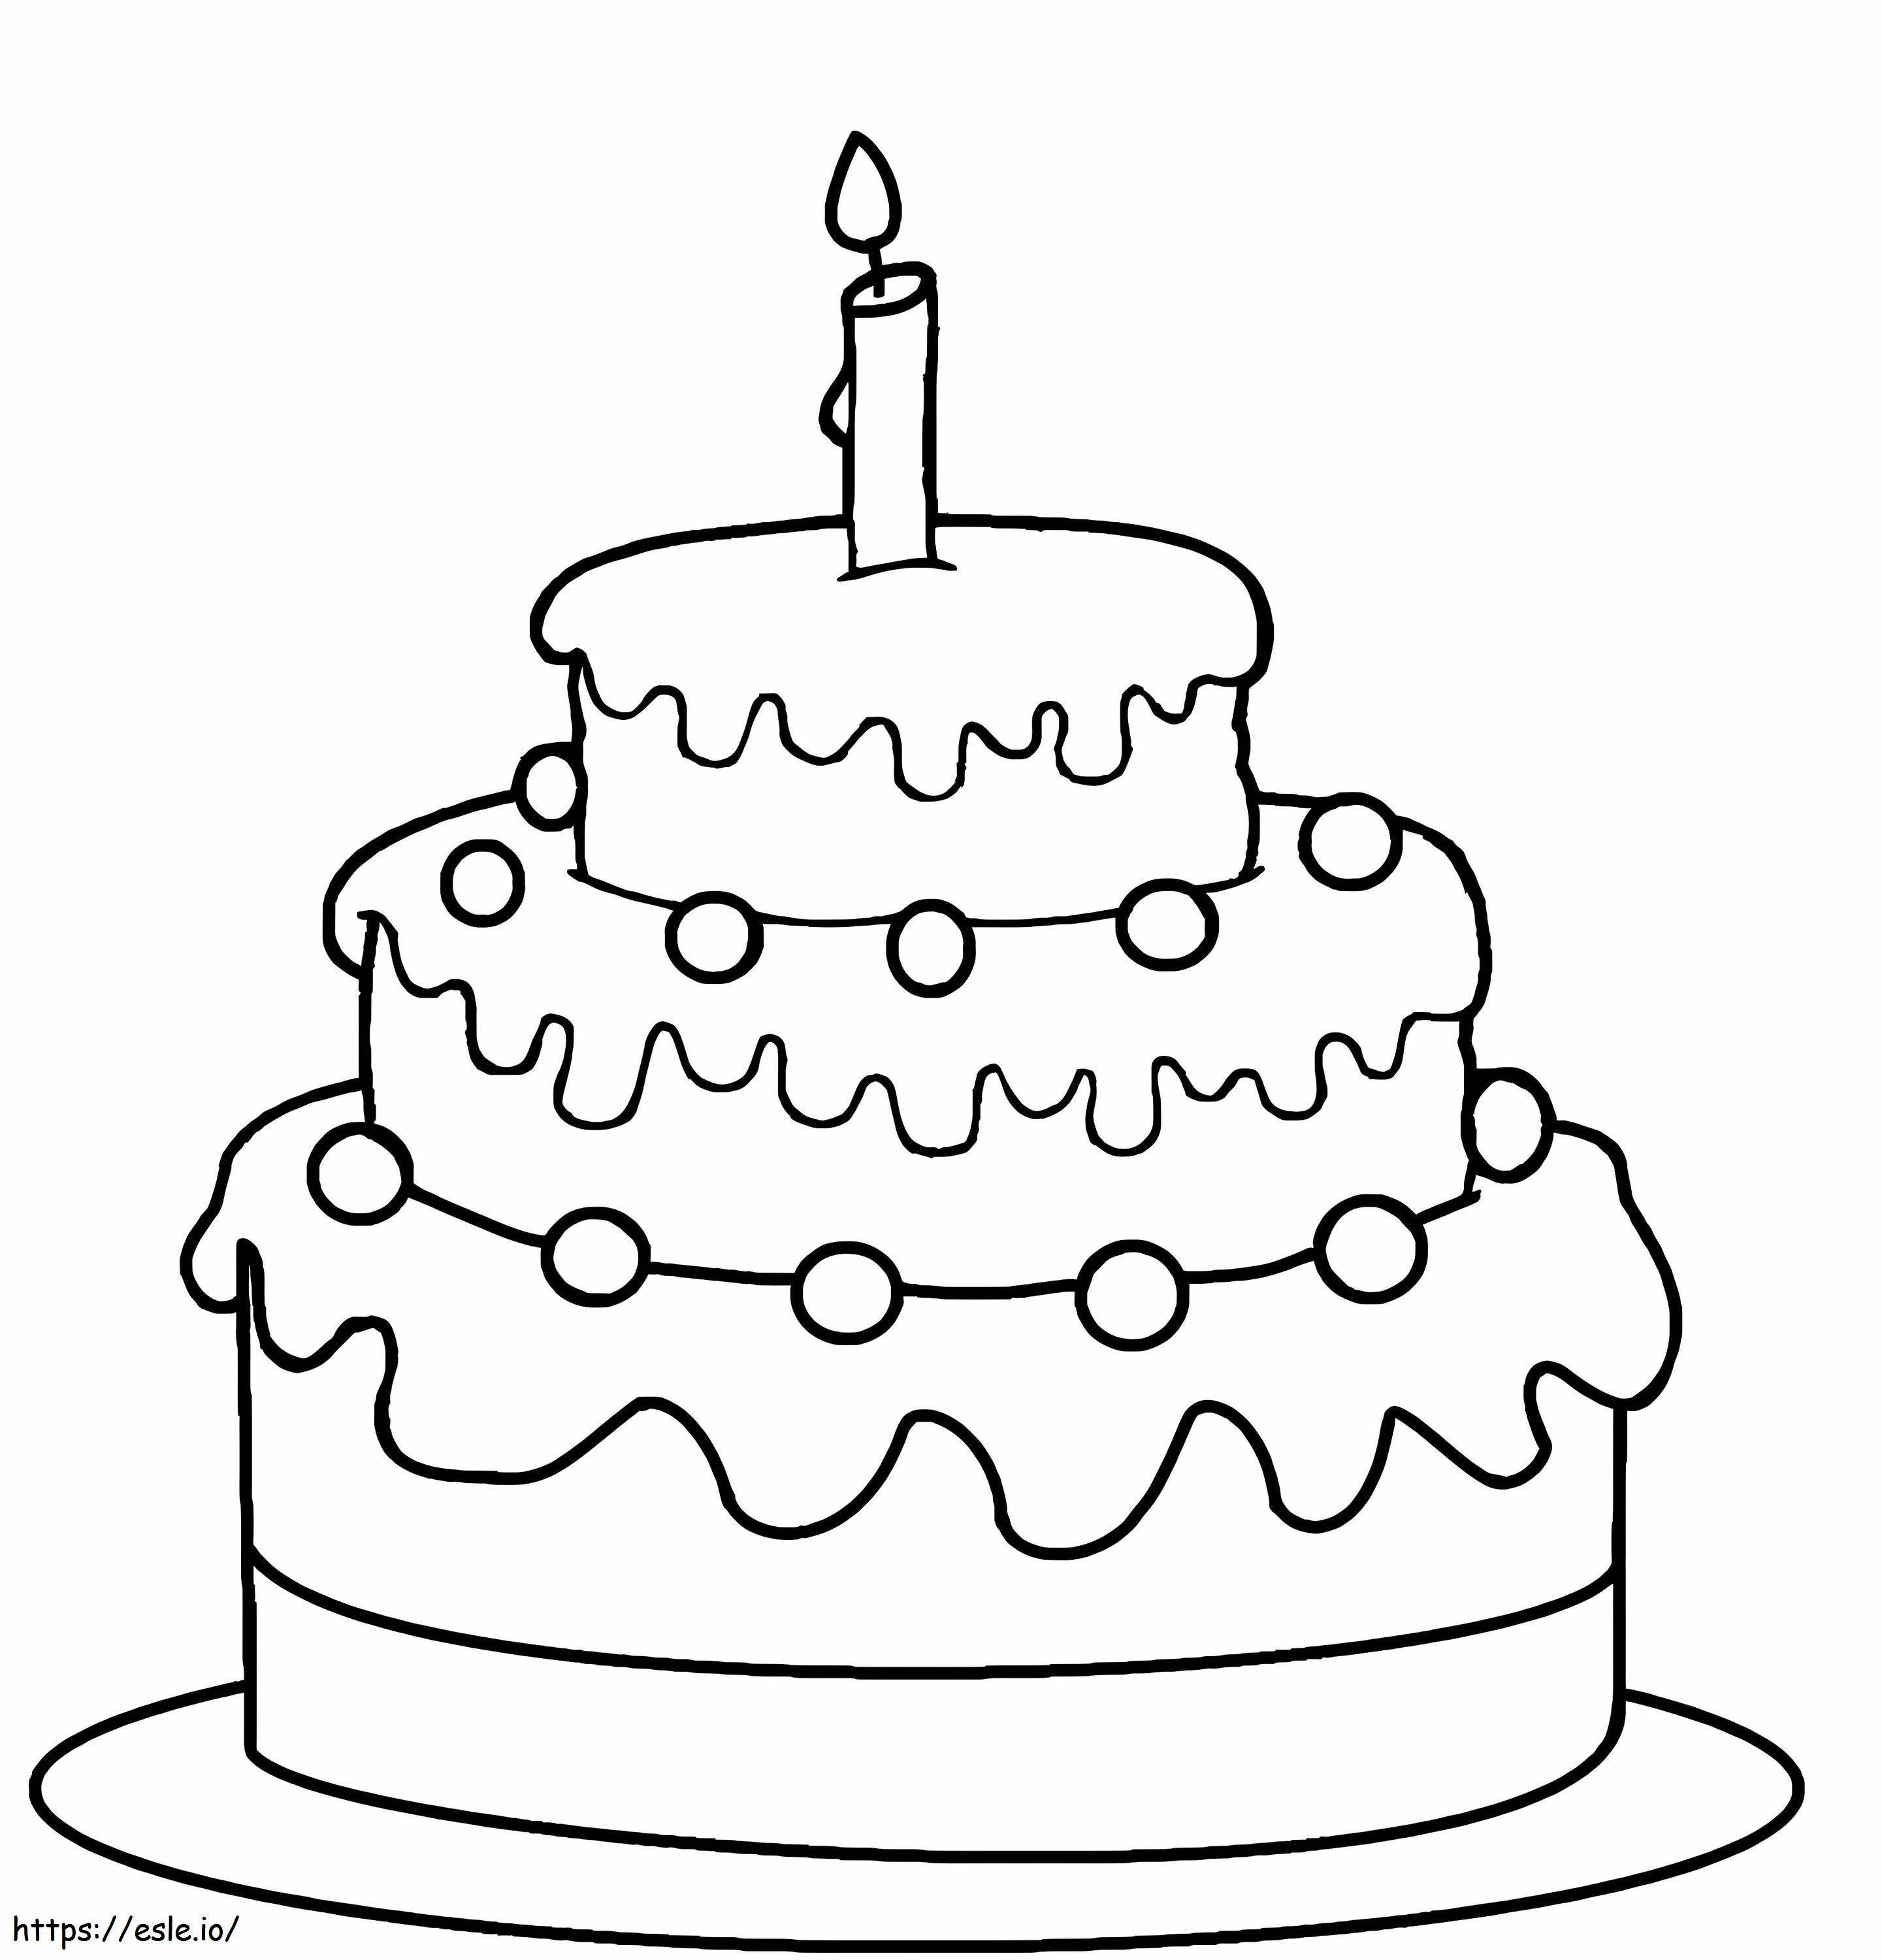 Normal Birthday Cake coloring page